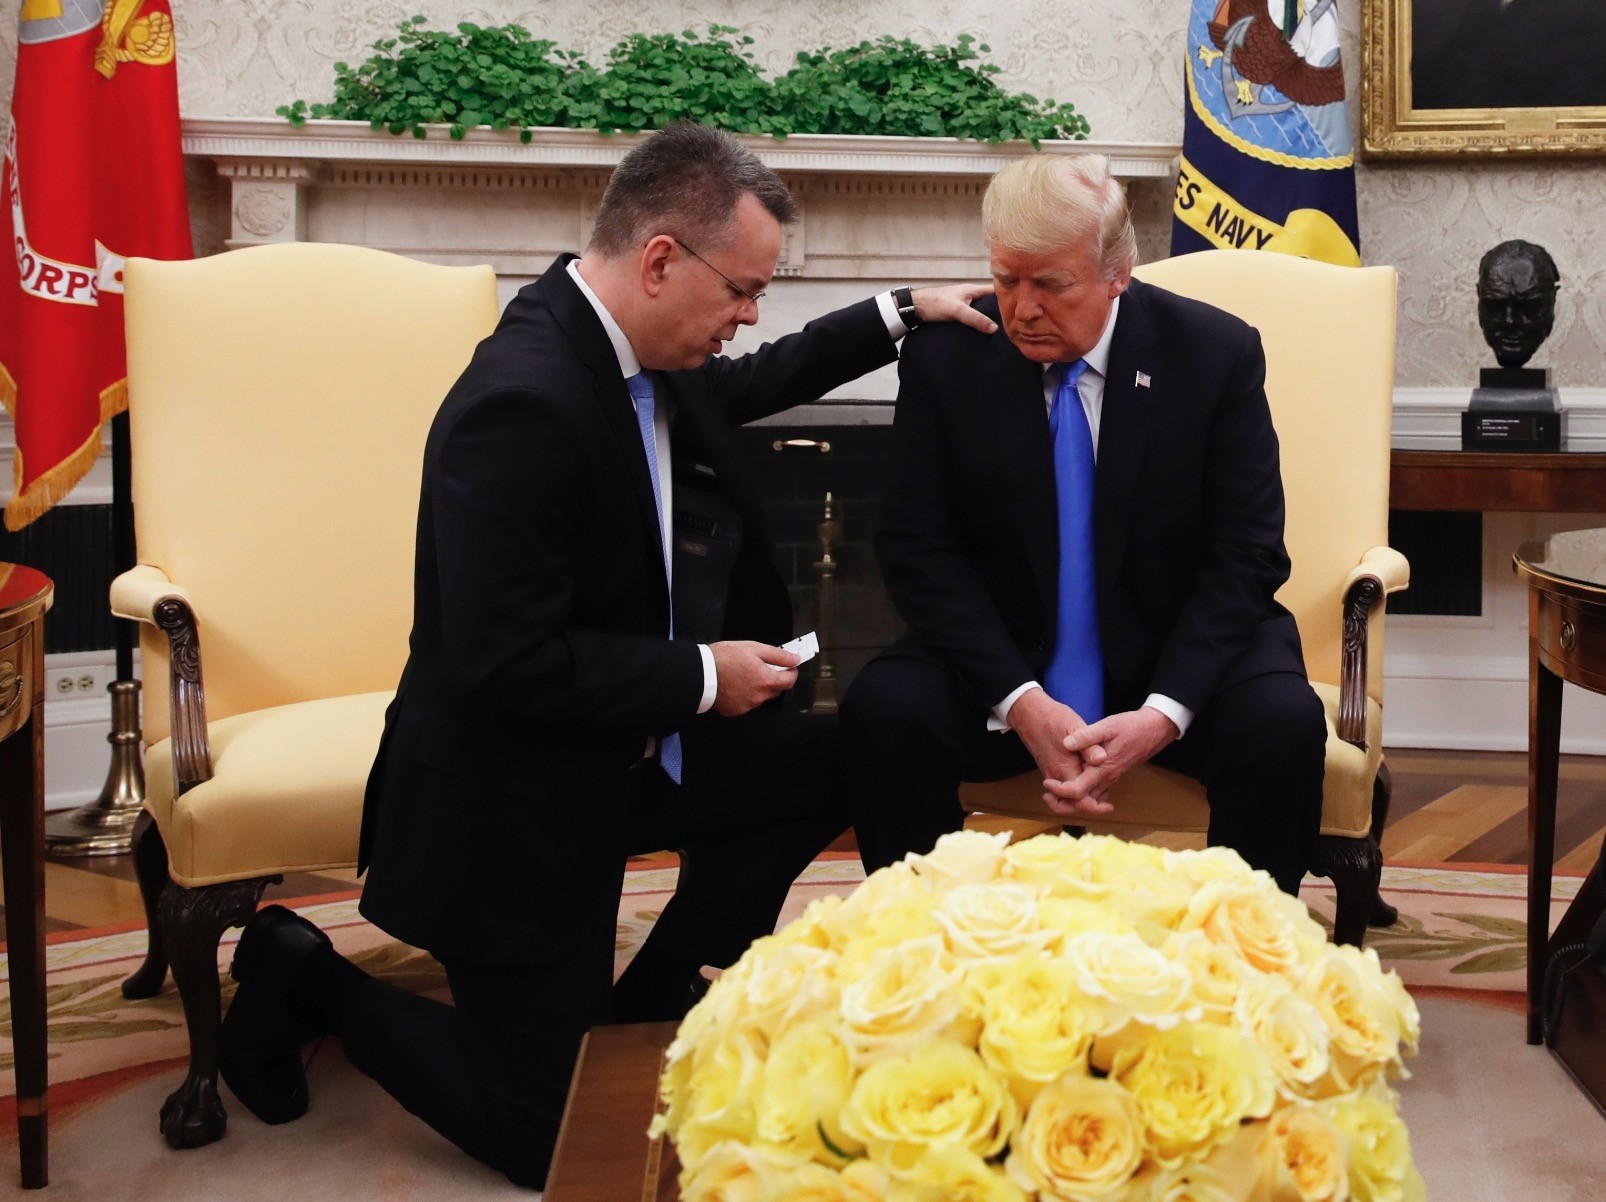 U.S. President Donald Trump prays with American pastor Andrew Brunson in the Oval Office of the White House, Saturday, Oct. 13, in Washington.